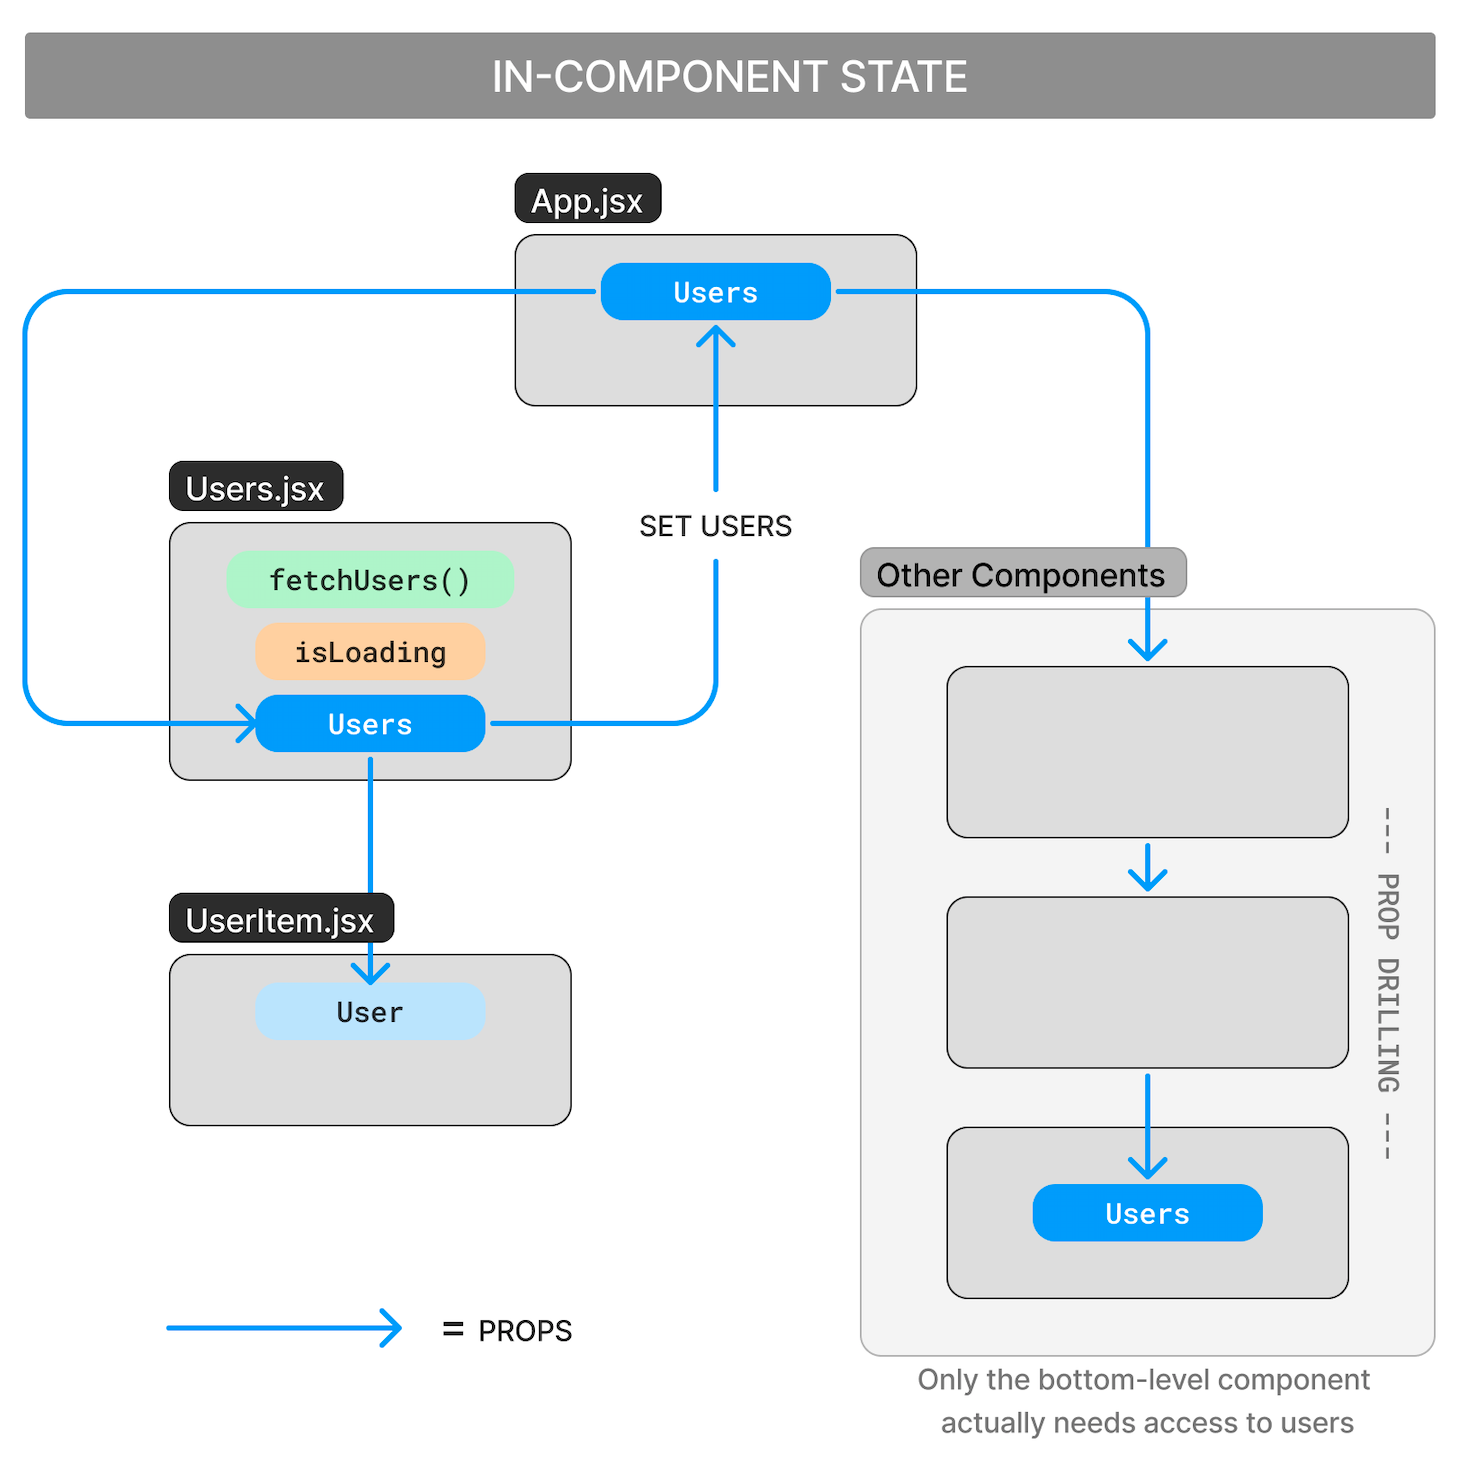 in-component state